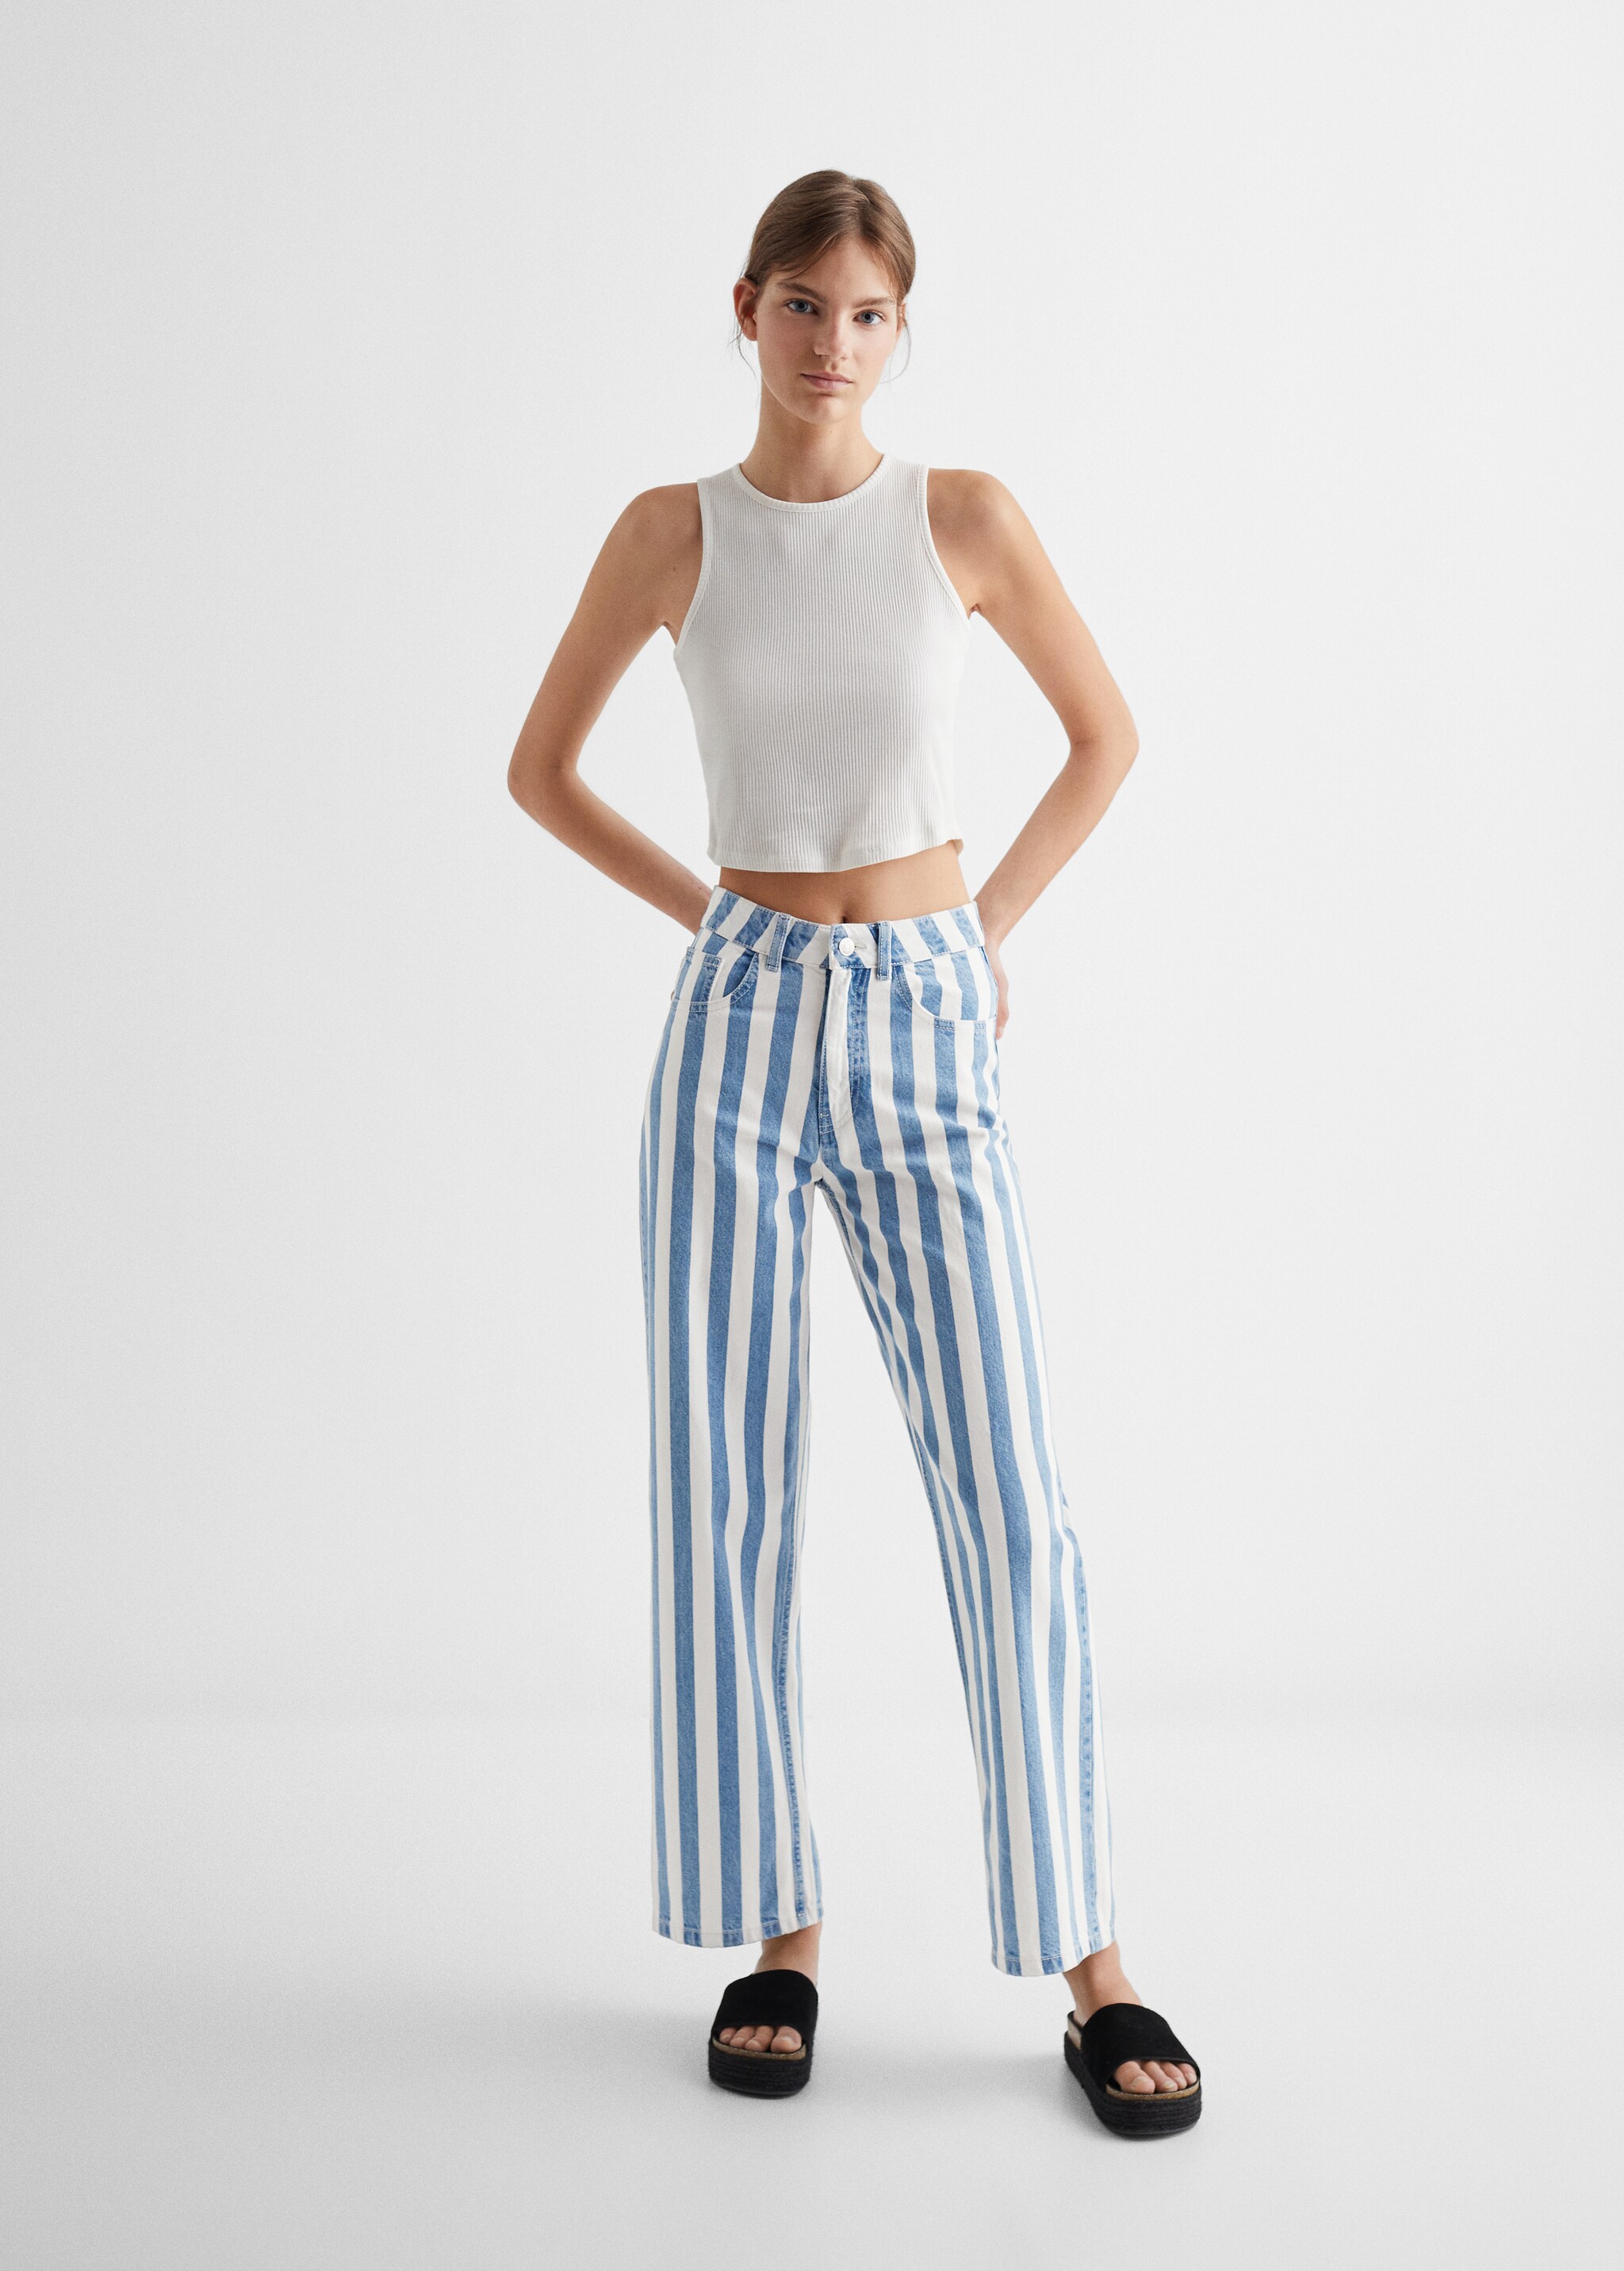 Straight striped jeans - General plane